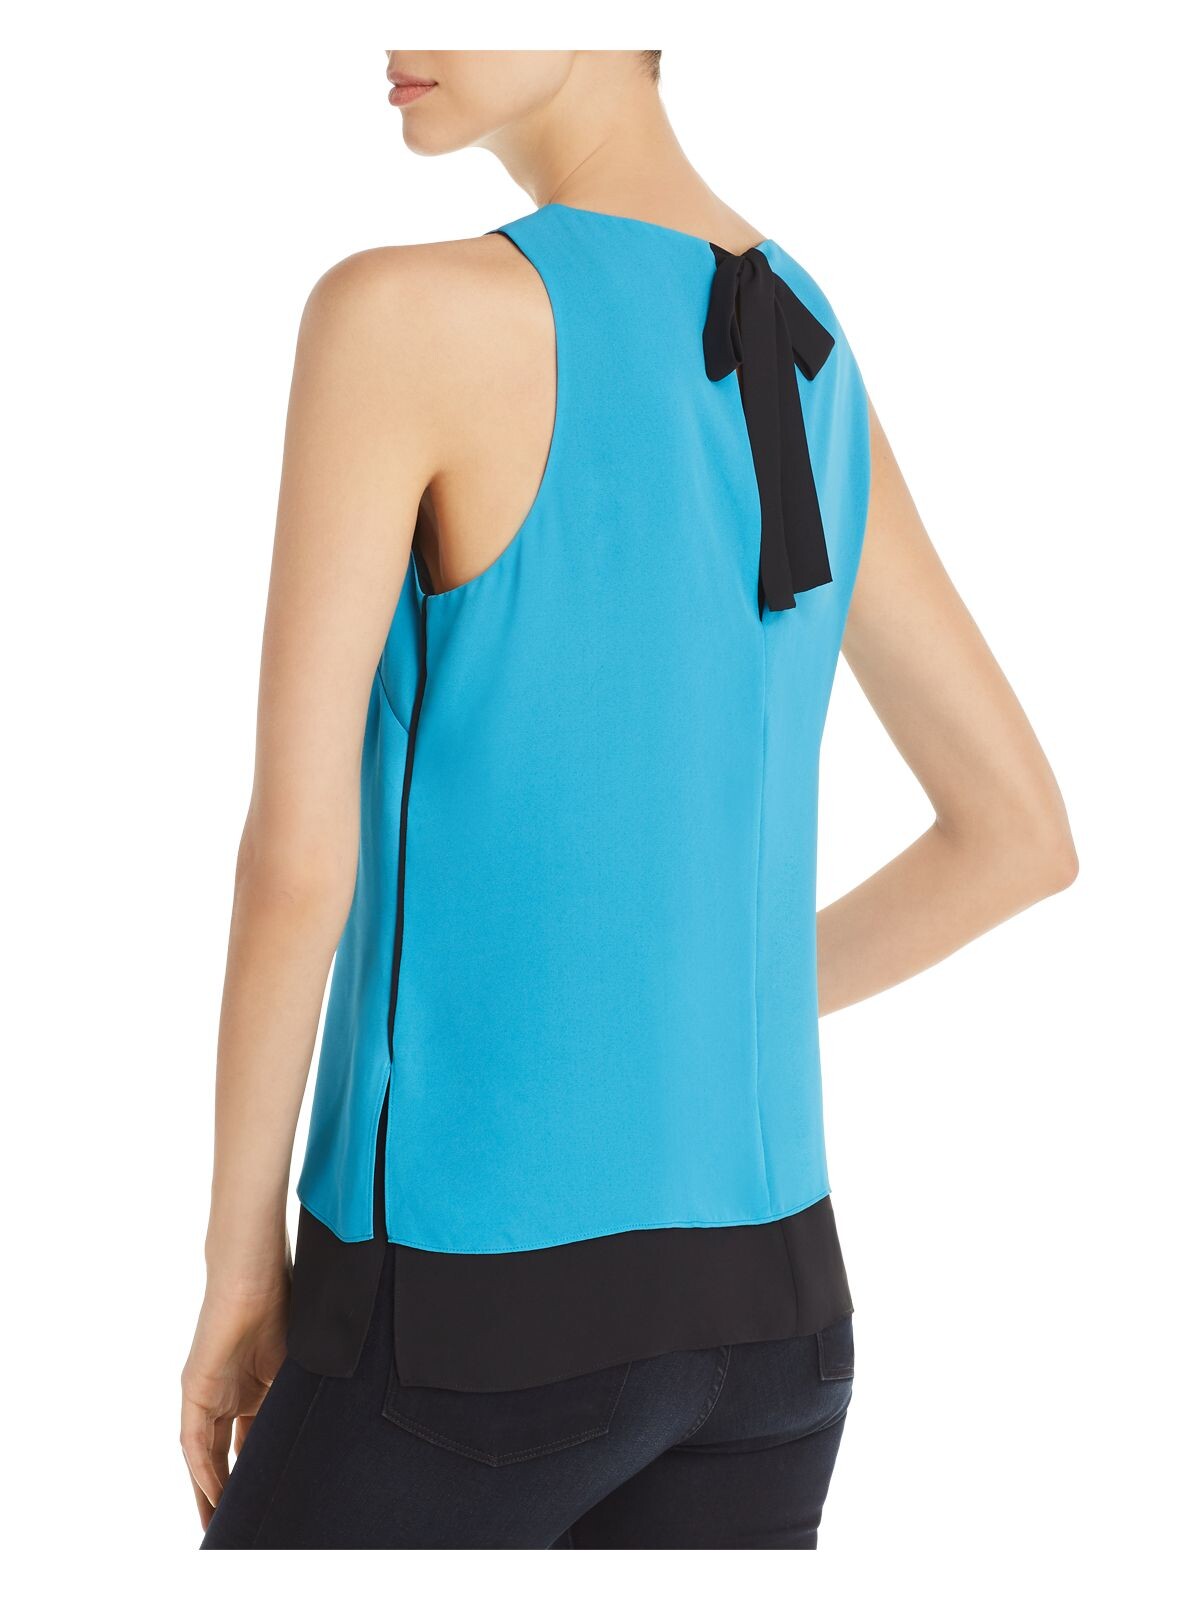 LE GALI Womens Blue Tie Solid Sleeveless Jewel Neck Top Size: S